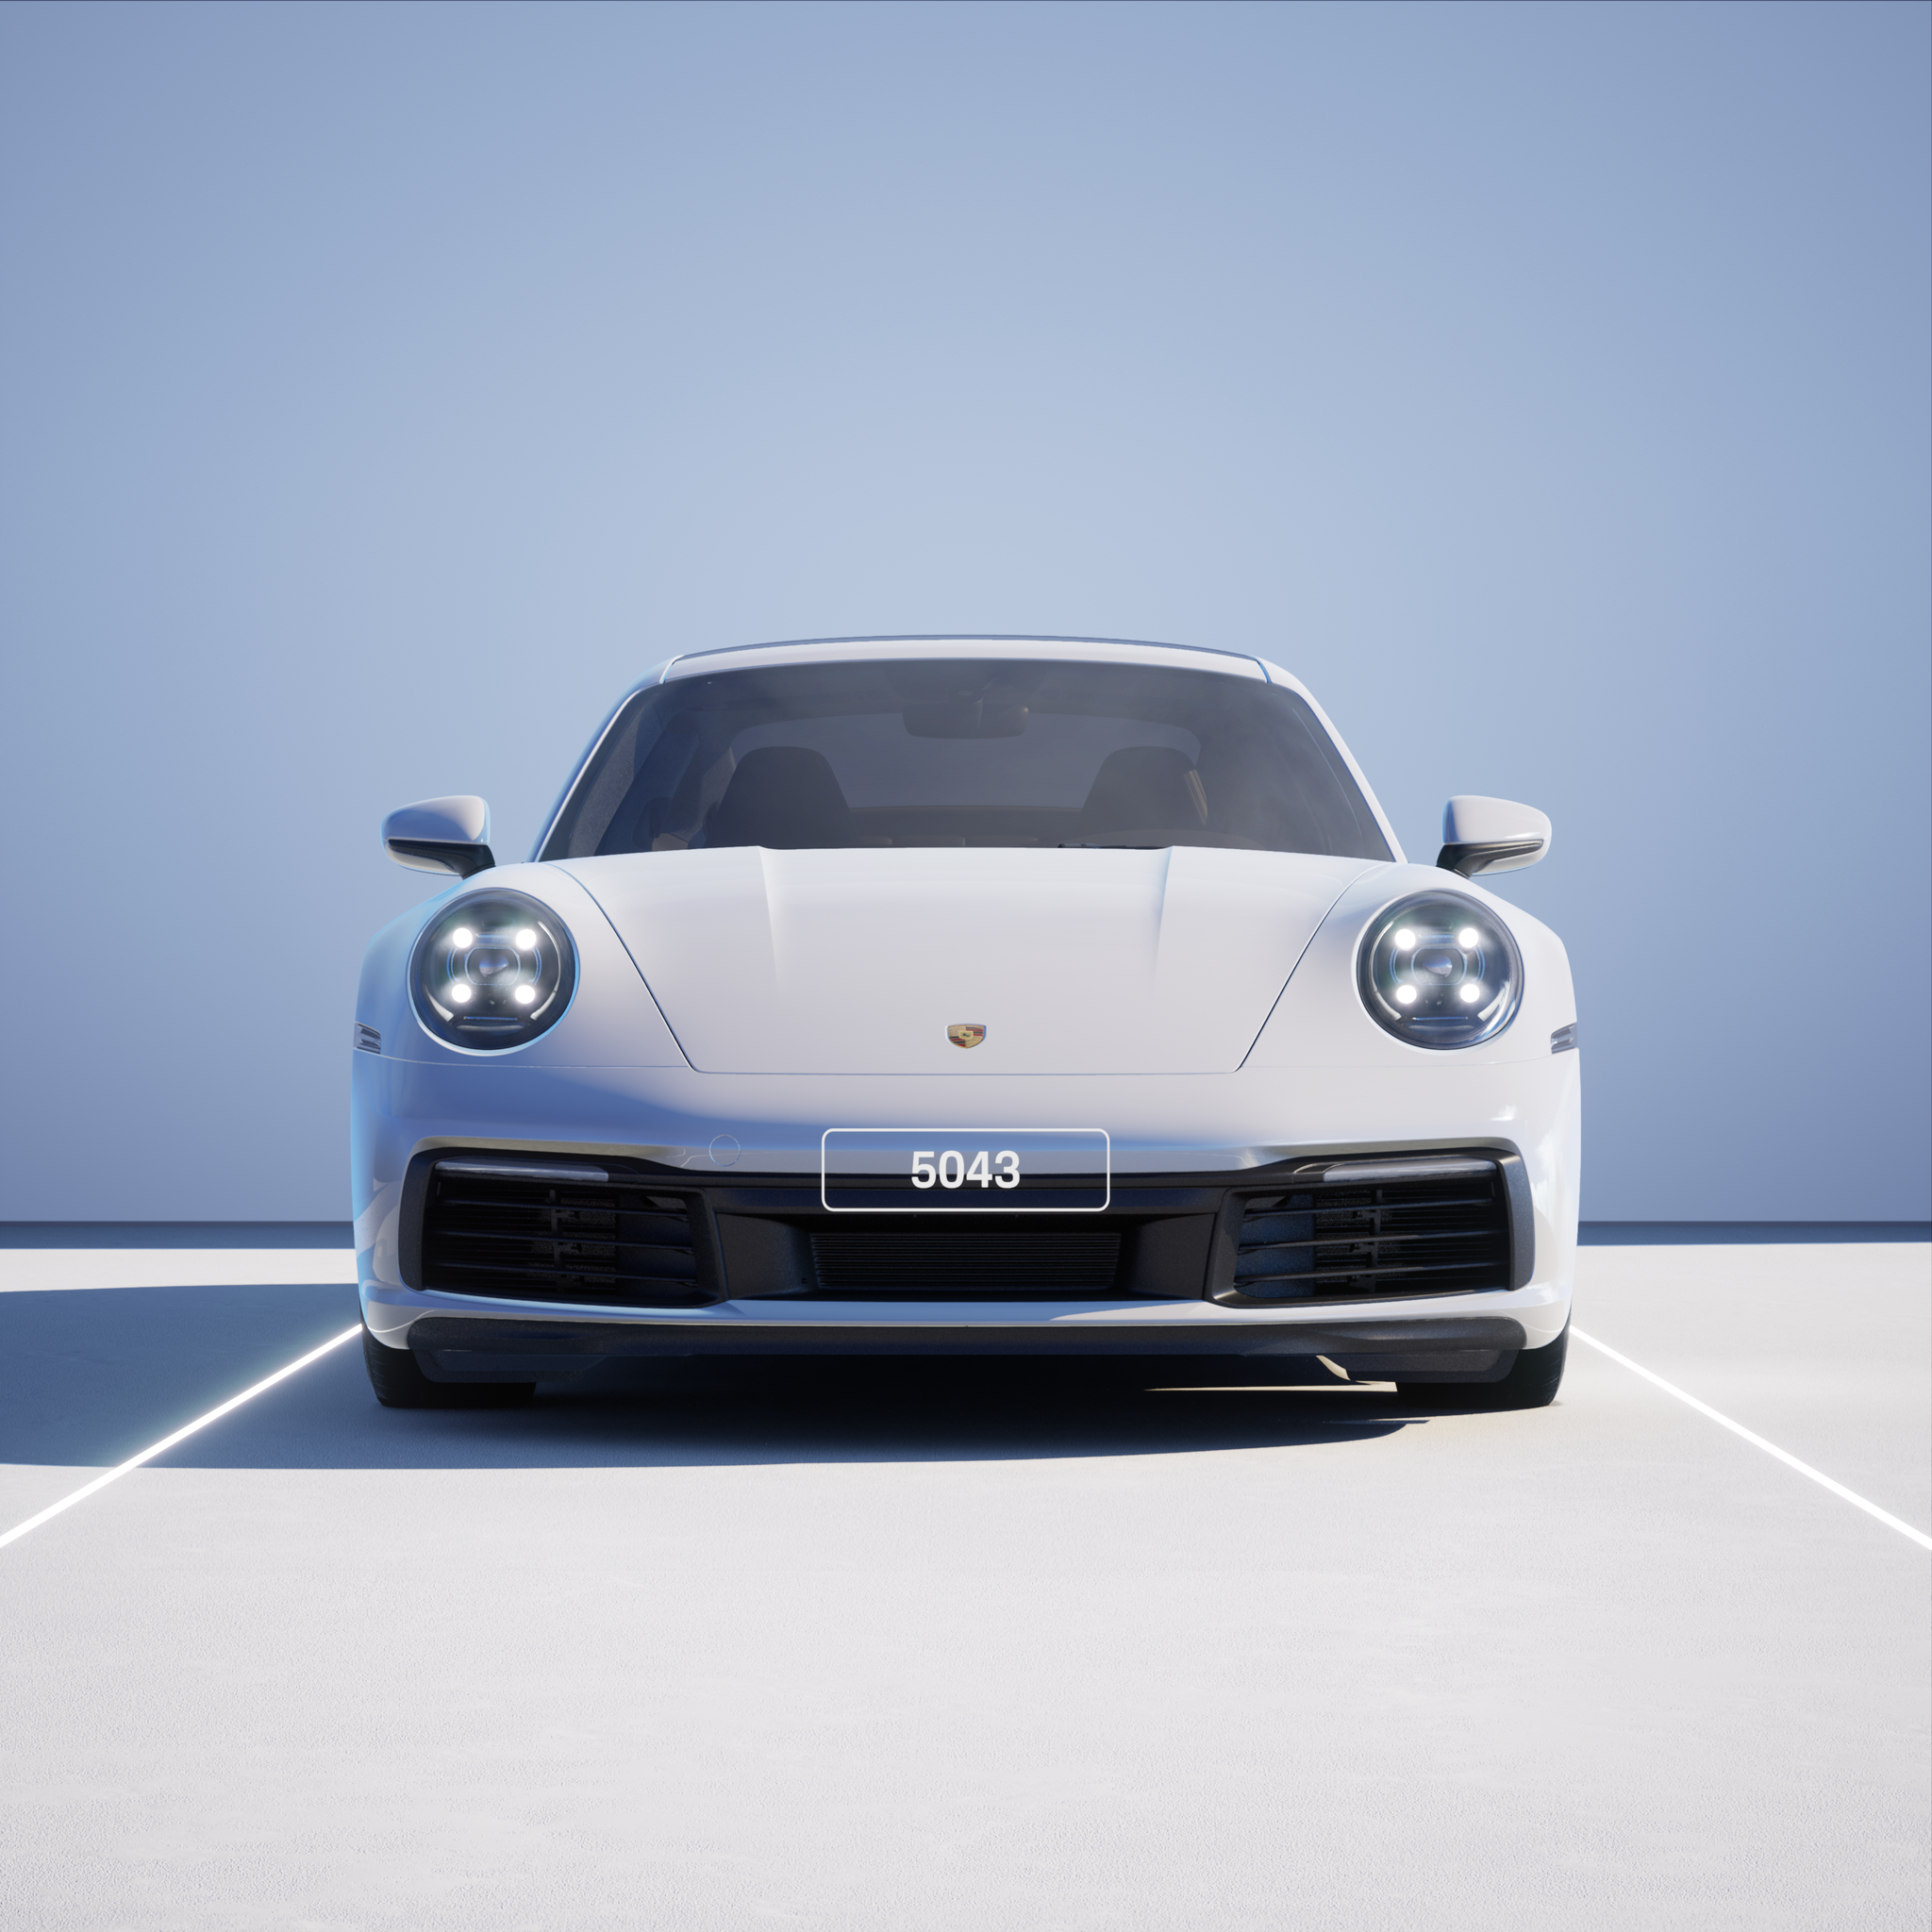 The PORSCHΞ 911 5043 image in phase